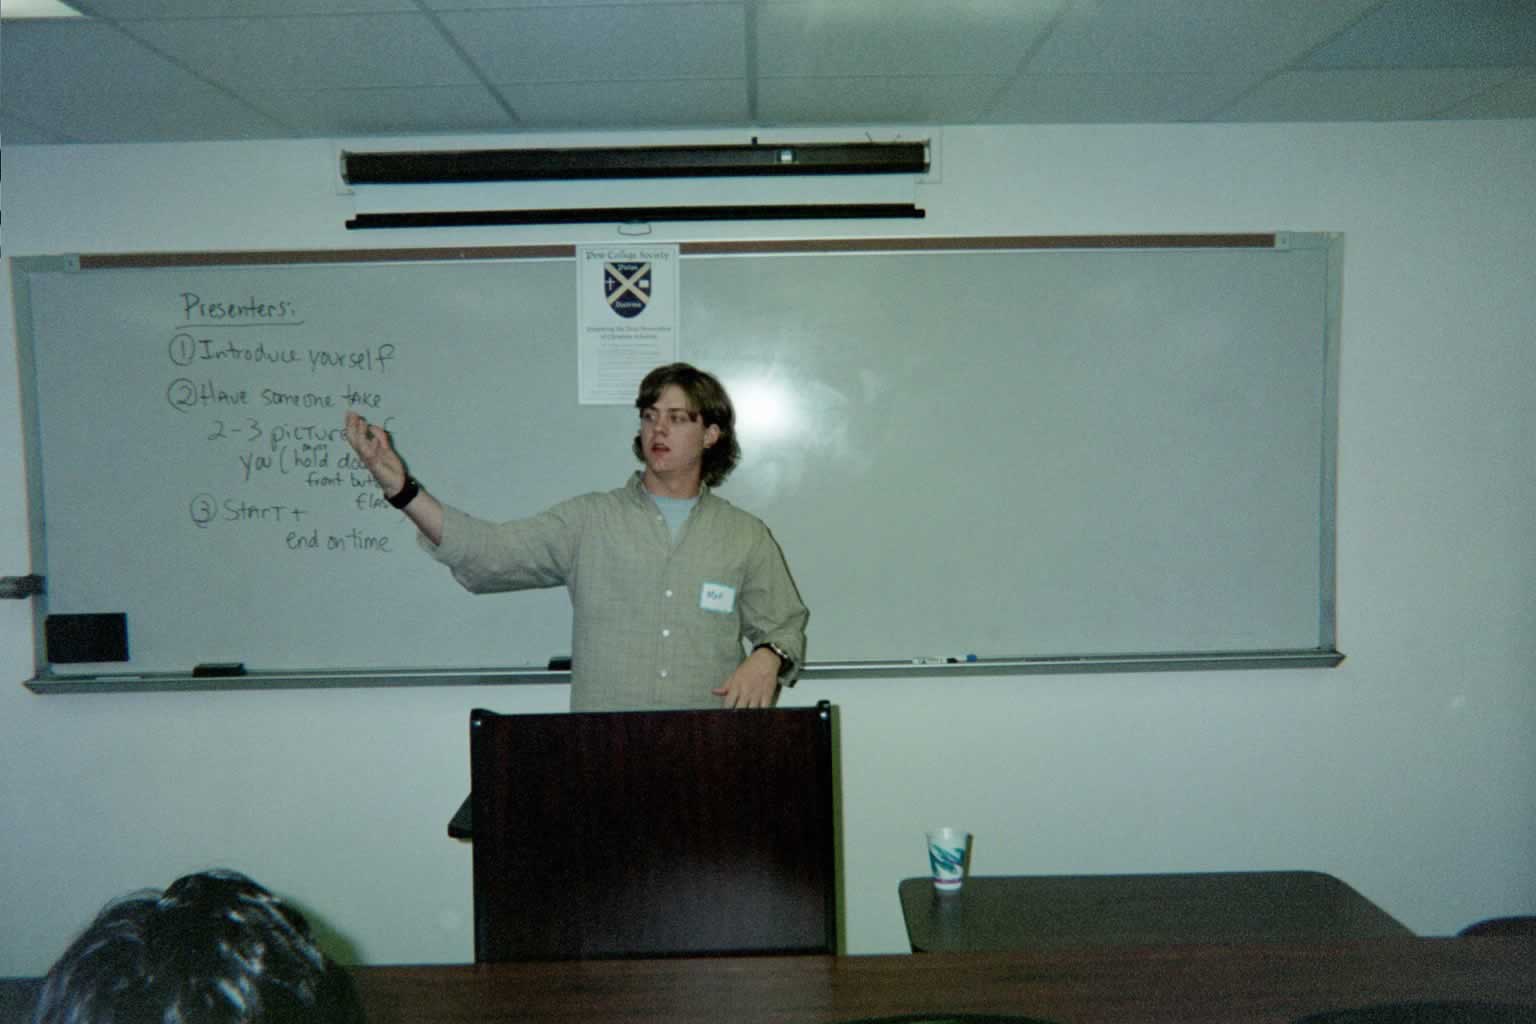 picture of a student standing behind the podium with their arms raised